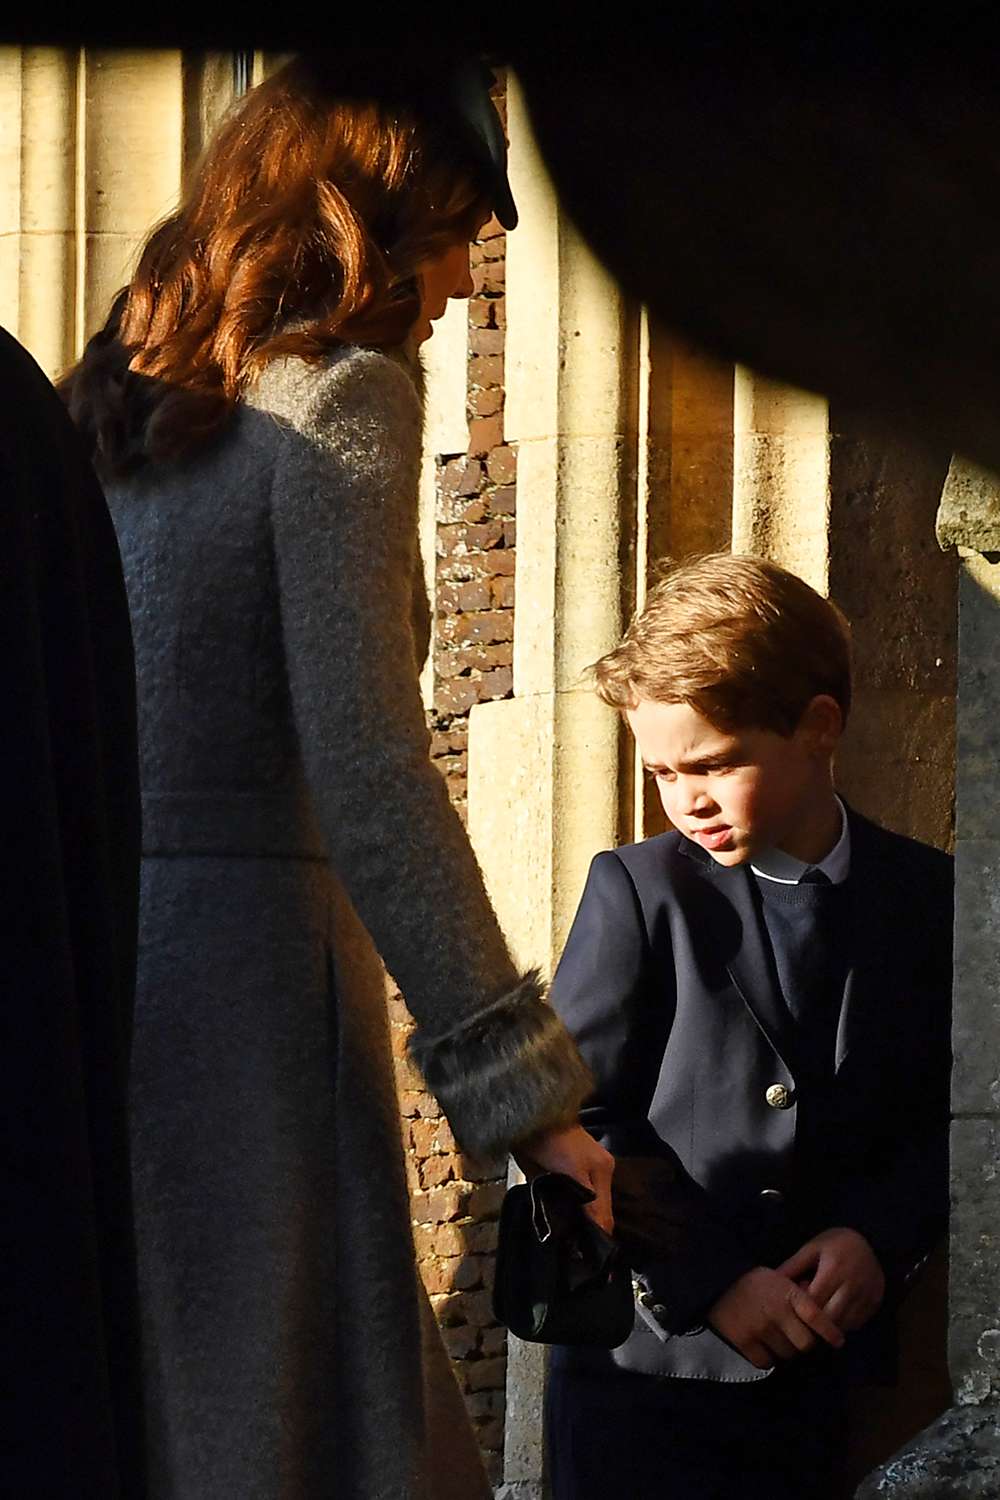 Britain's Prince George of Cambridge (R) and his mother Britain's Catherine, Duchess of Cambridge arrive for the Royal Family's traditional Christmas Day service at St Mary Magdalene Church in Sandri ngham, Norfolk, eastern England, on December 25, 2019. (Photo by Ben STANSALL / AFP) (Photo by BEN STANSALL/AFP via Getty Images)